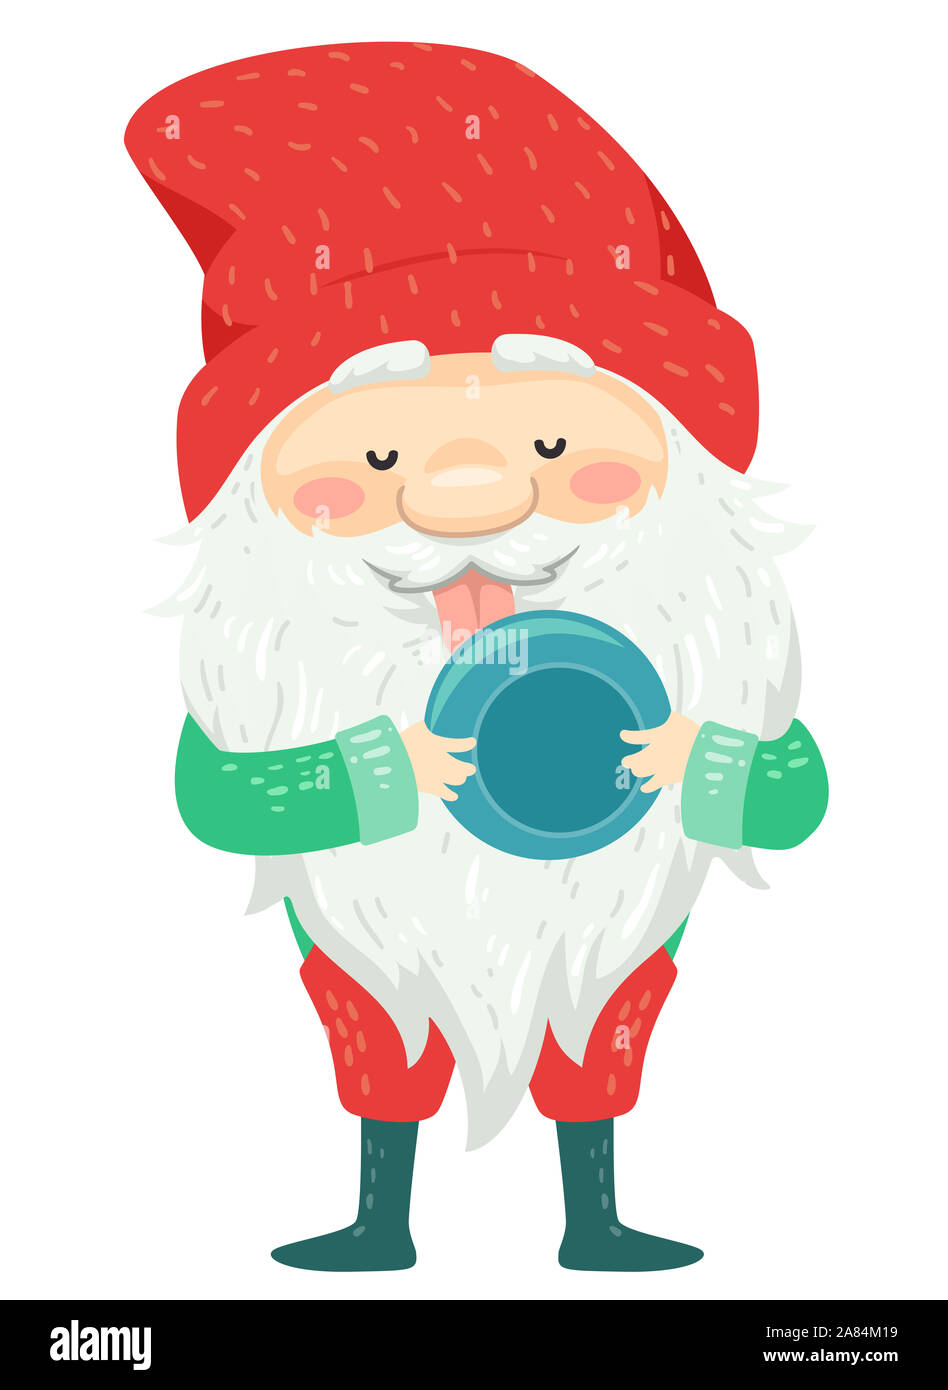 Illustration of a Cute Icelandic Bowl Licker Yule Lad in Iceland with Long White Beard and Mustache Wearing Red Bonnet Holding and Licking the Bowl Stock Photo